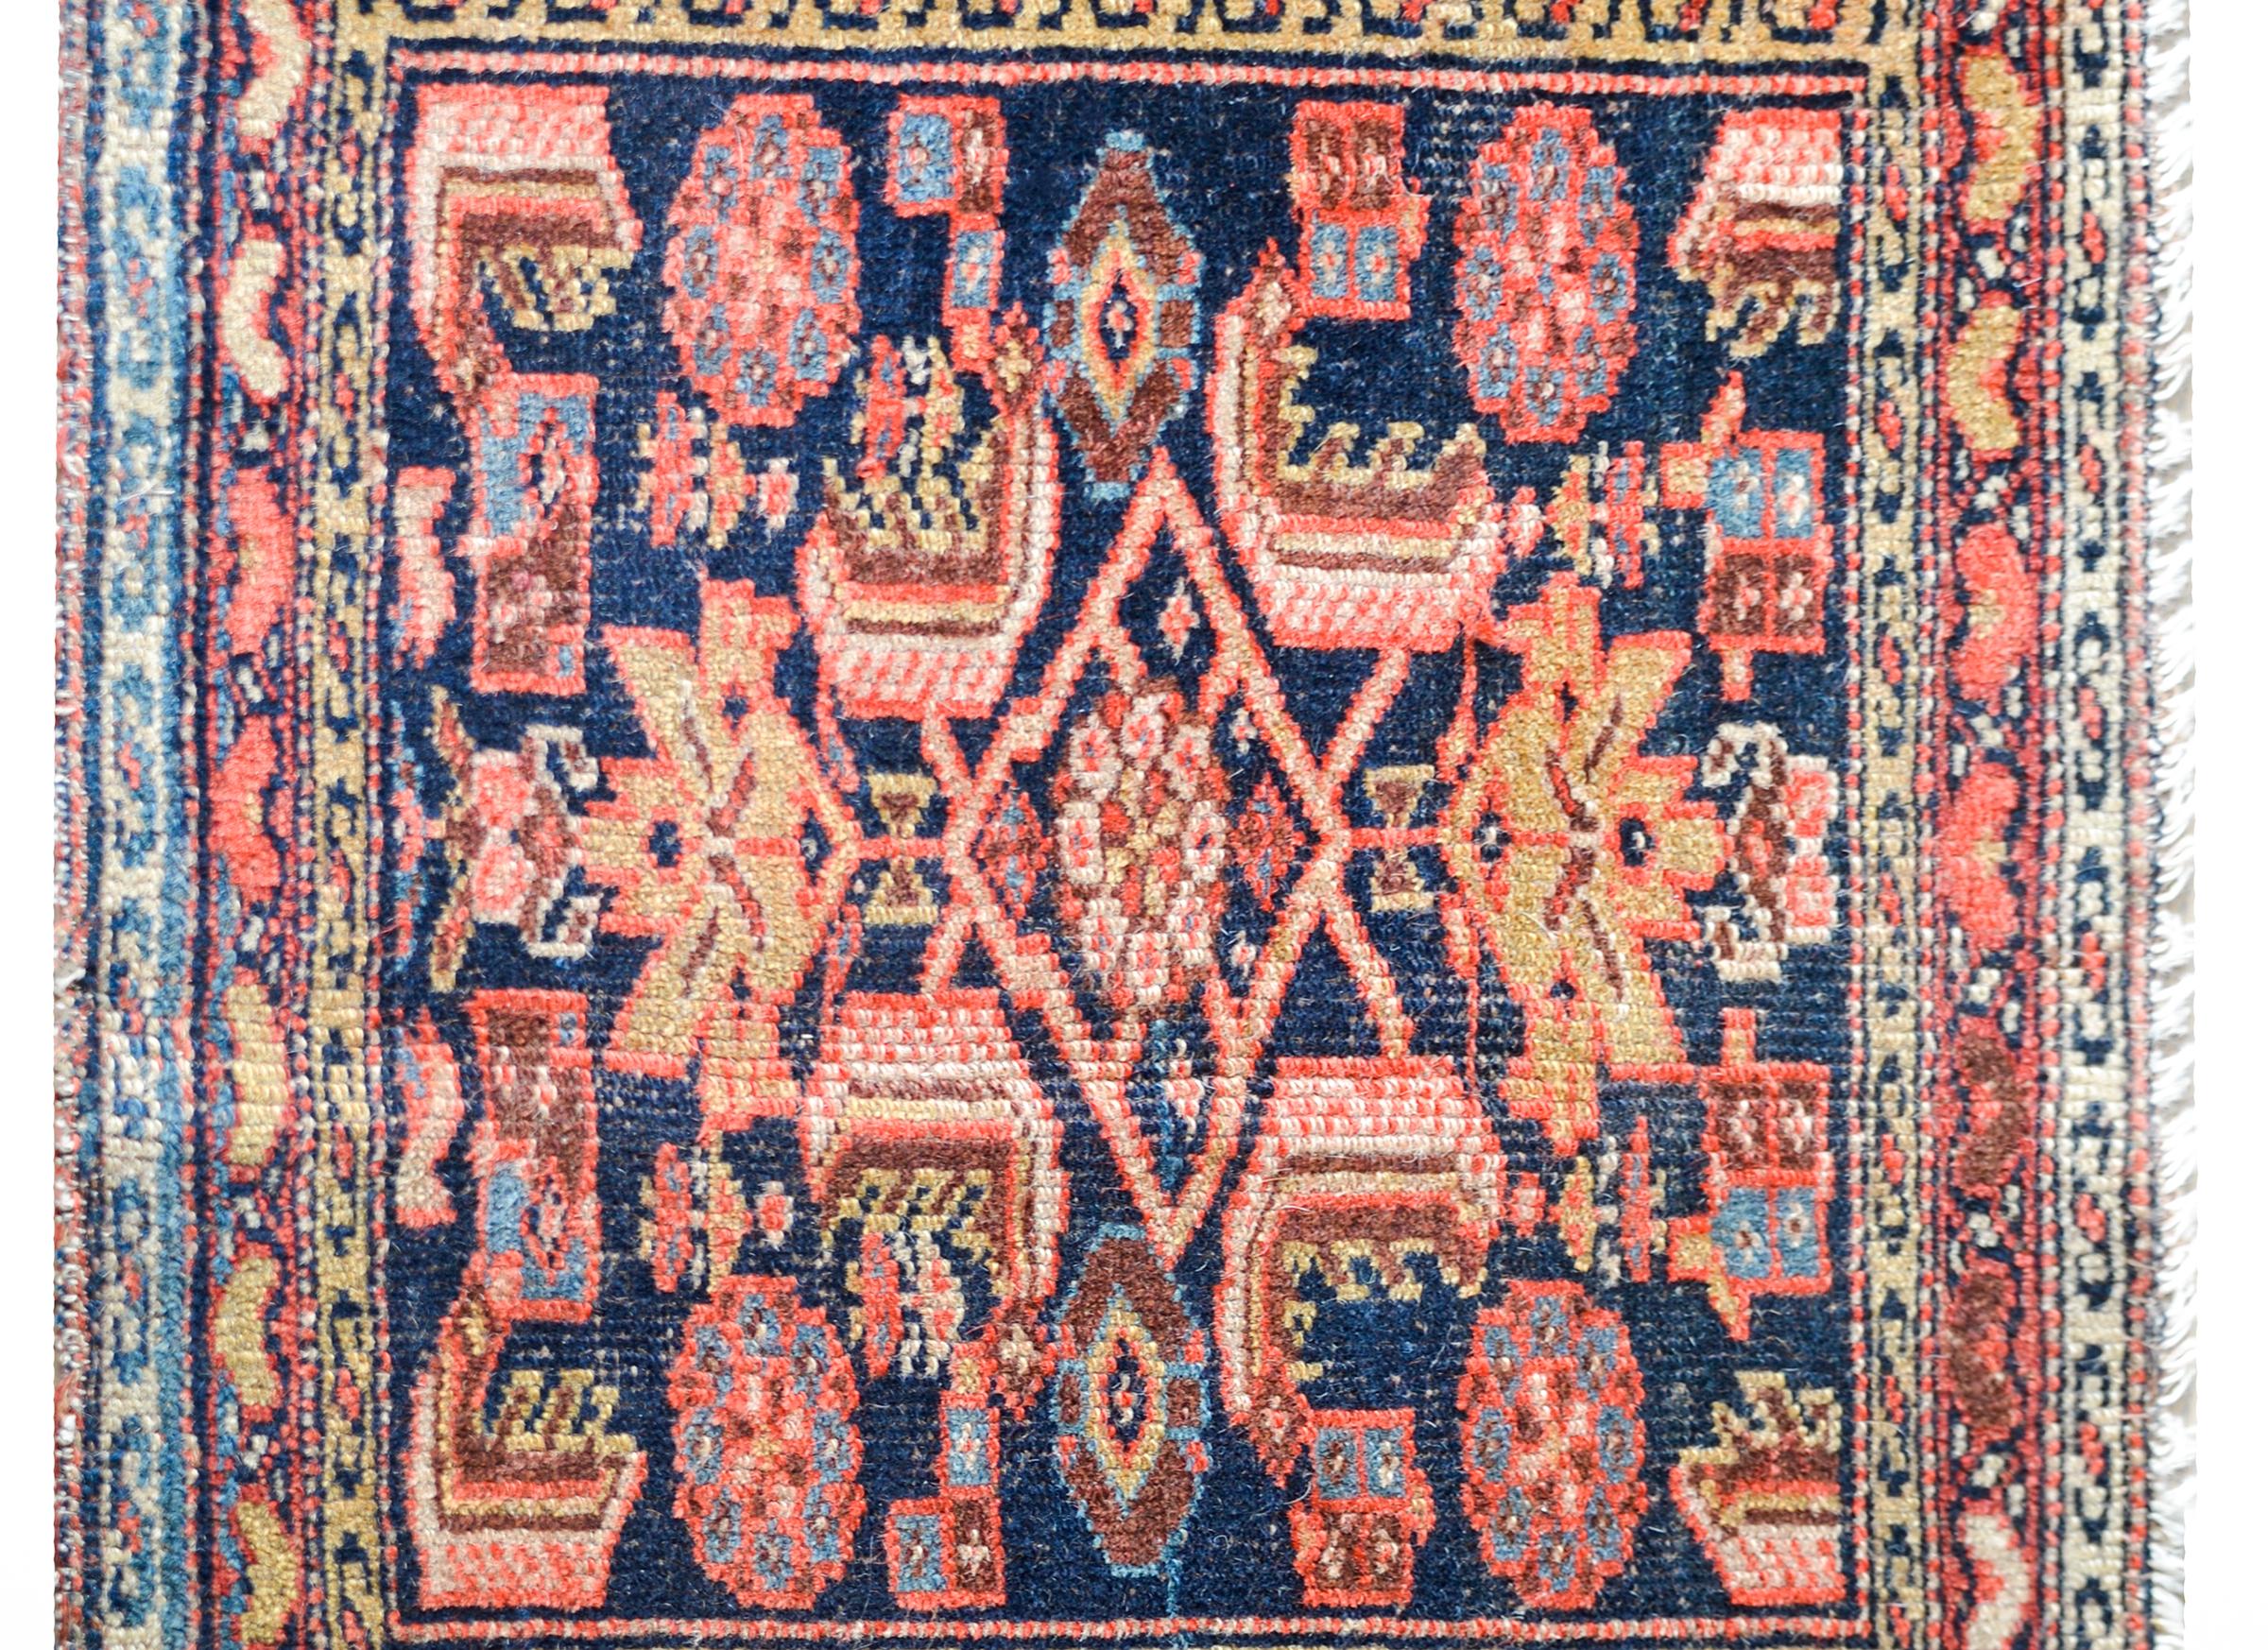 A wonderful early 20th century Persian Malayer bag face with a wonderful tribal pattern containing stylized flowers and leaves woven in pinks, crimsons, golds, and creams, against a dark indigo background. The border is expertly woven with multiple